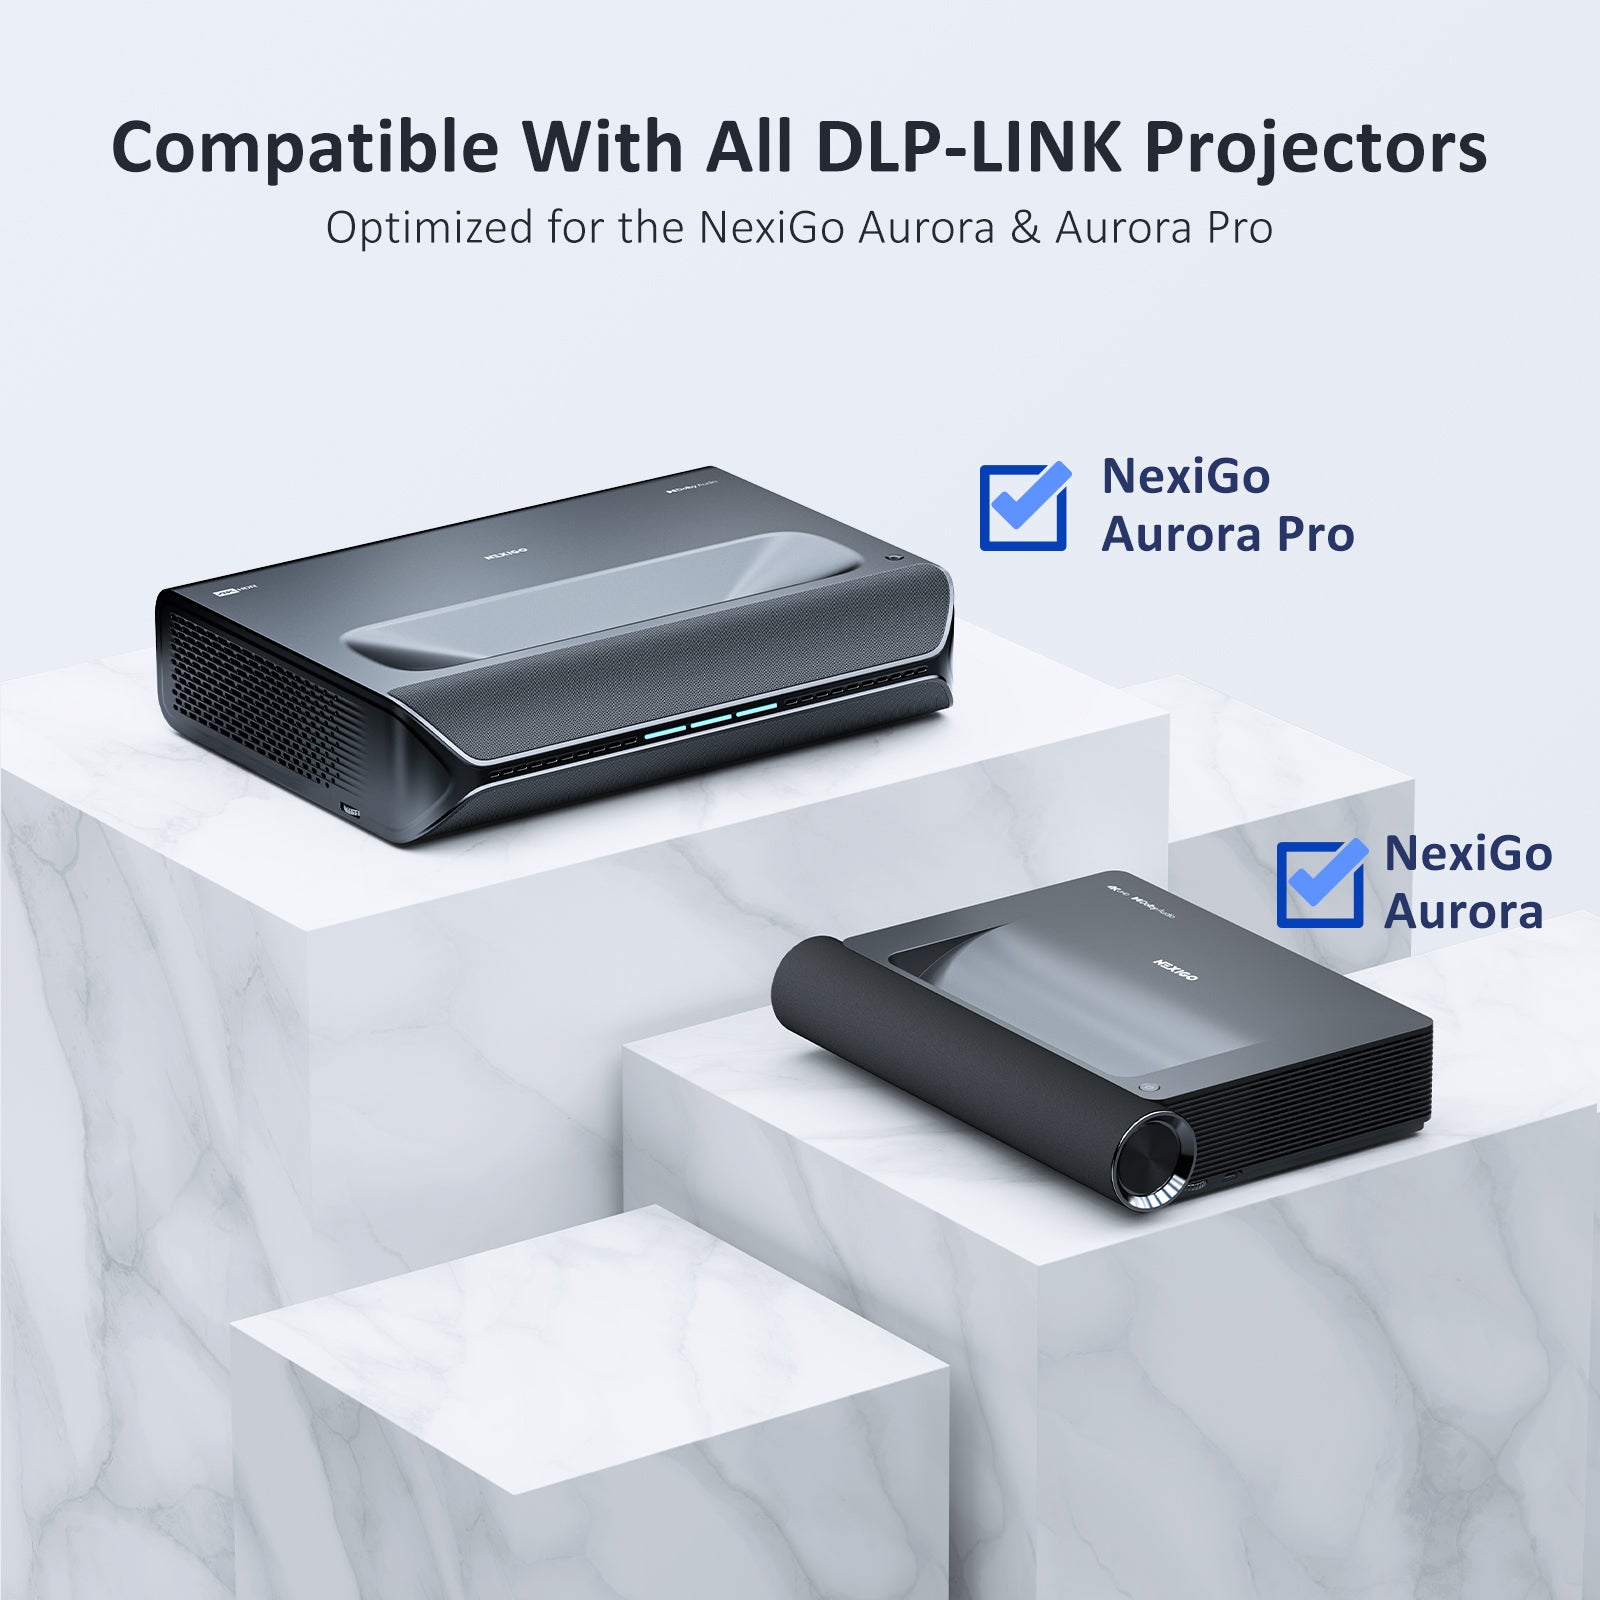 NexiGO Aurora Pro and Aurora projectors are placed on the display stand